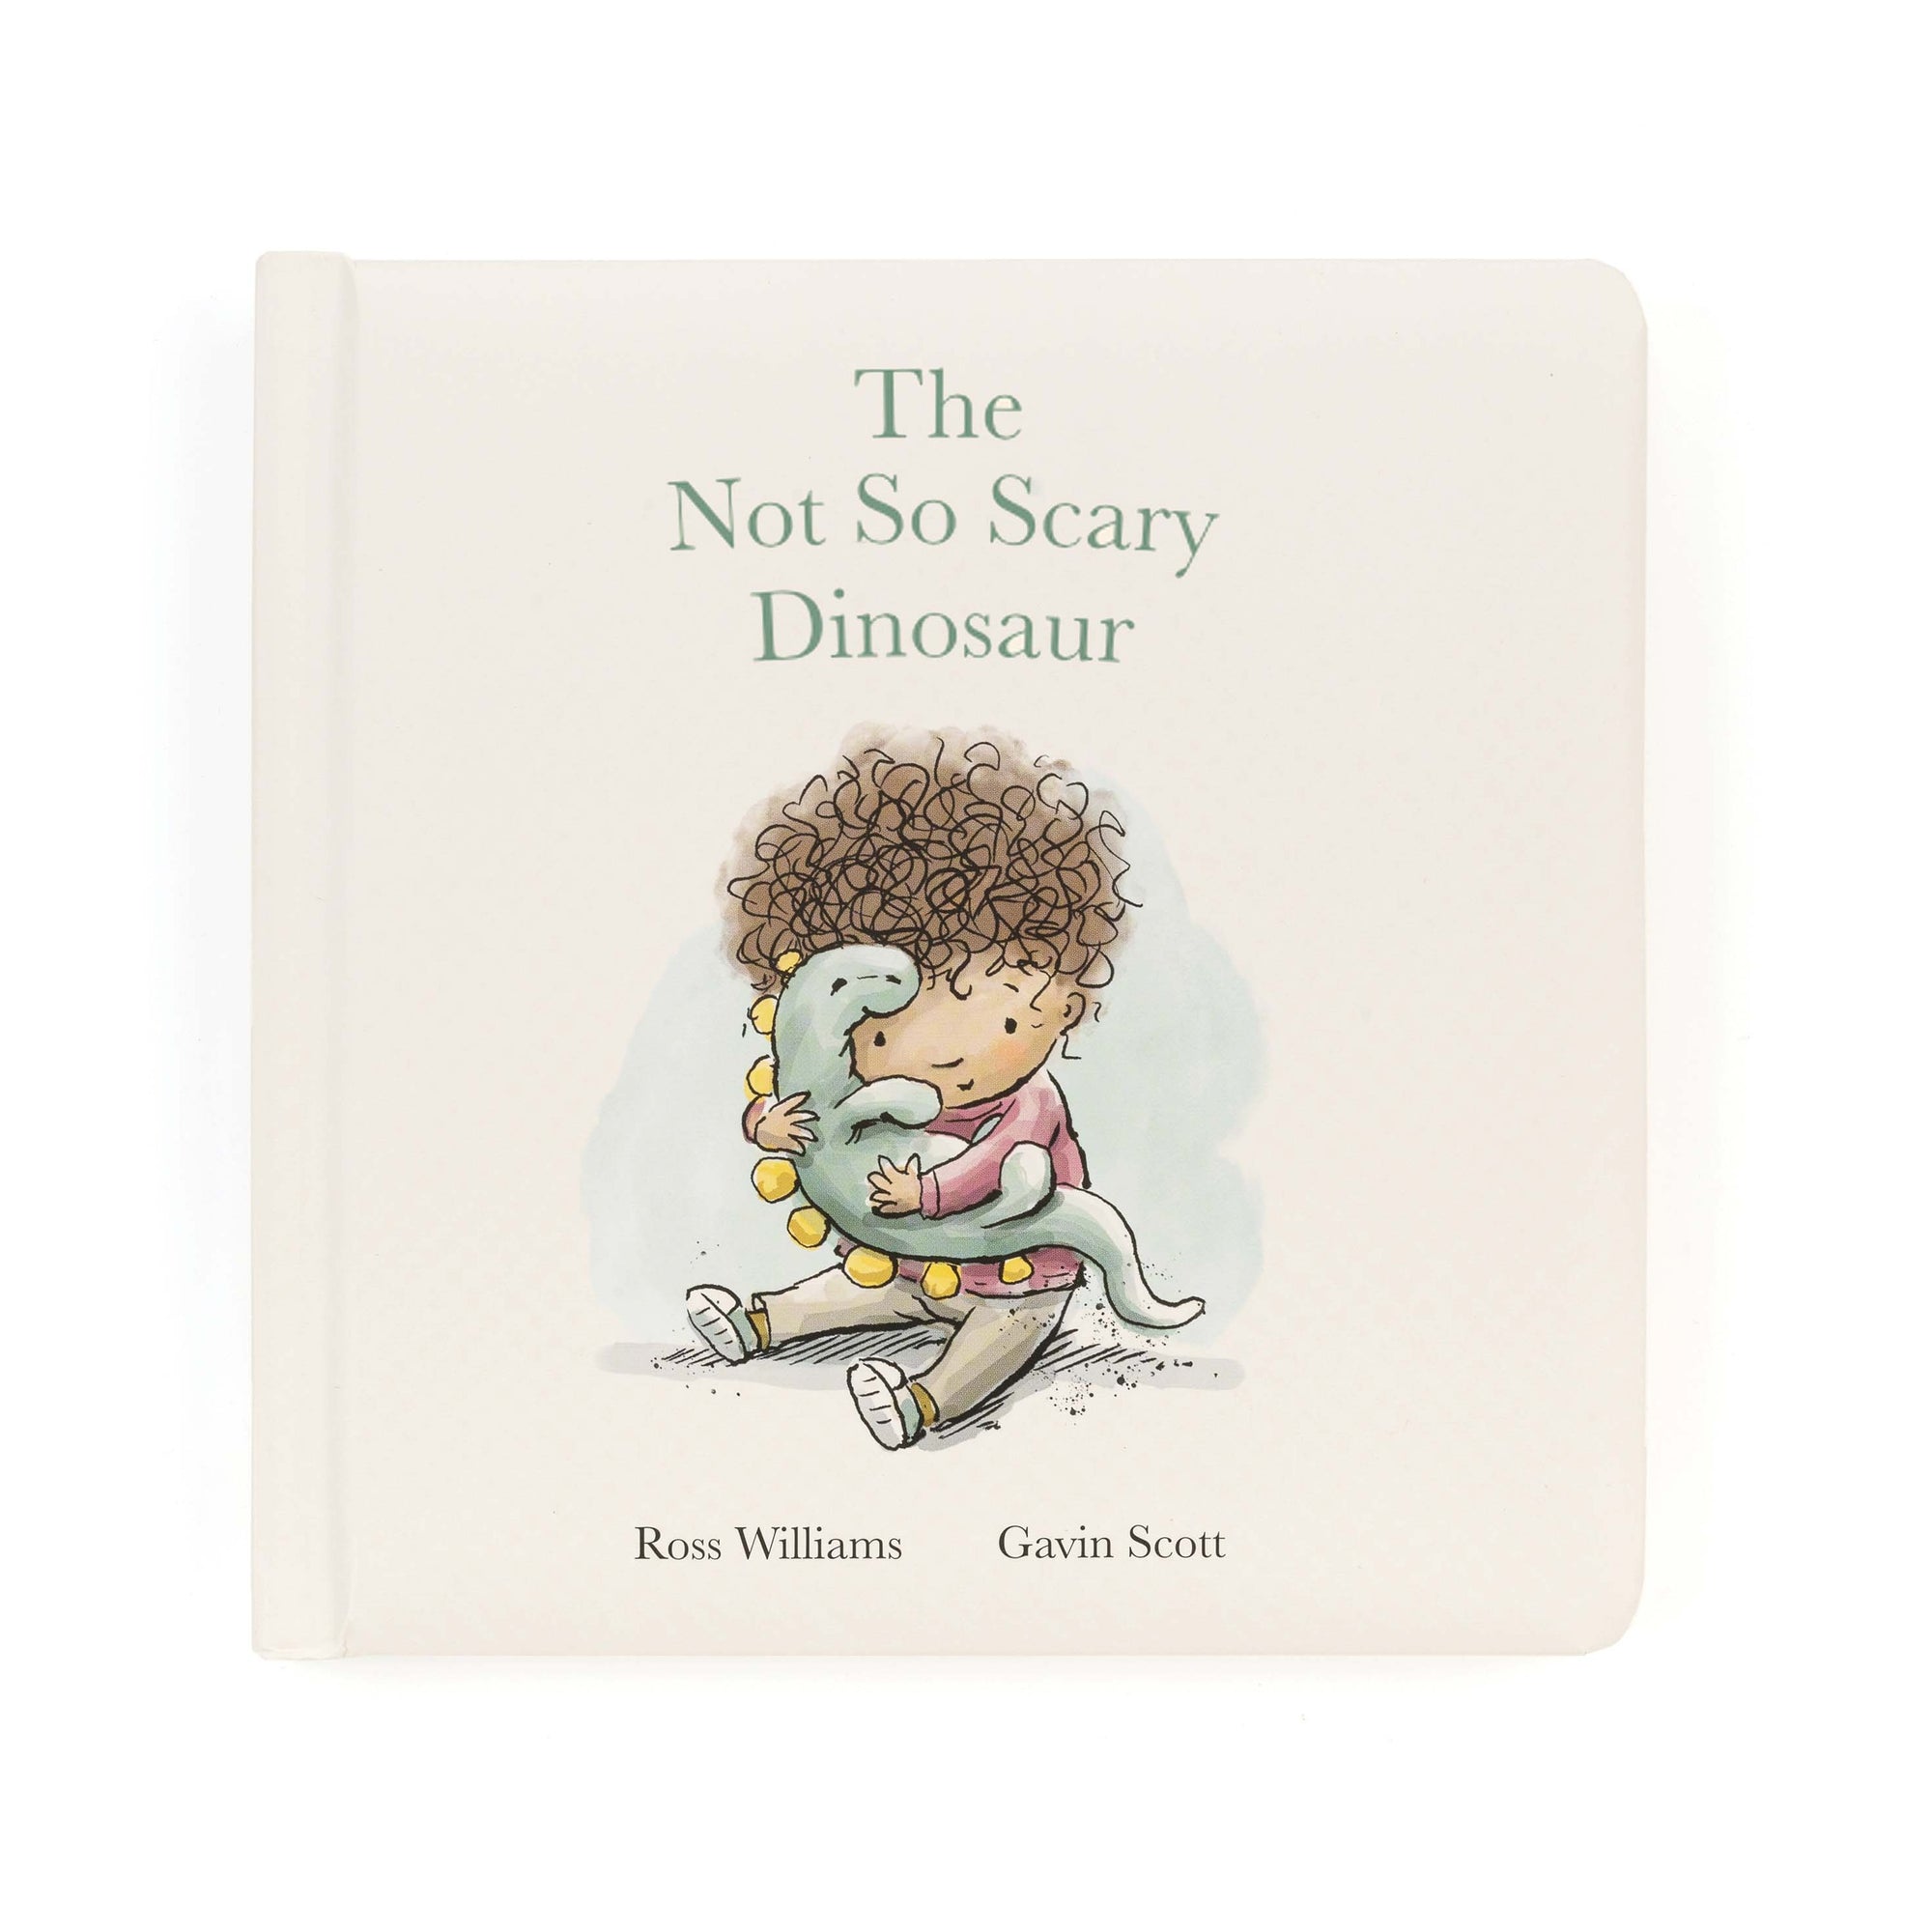 jellycat dinosaur book - angus and dudley